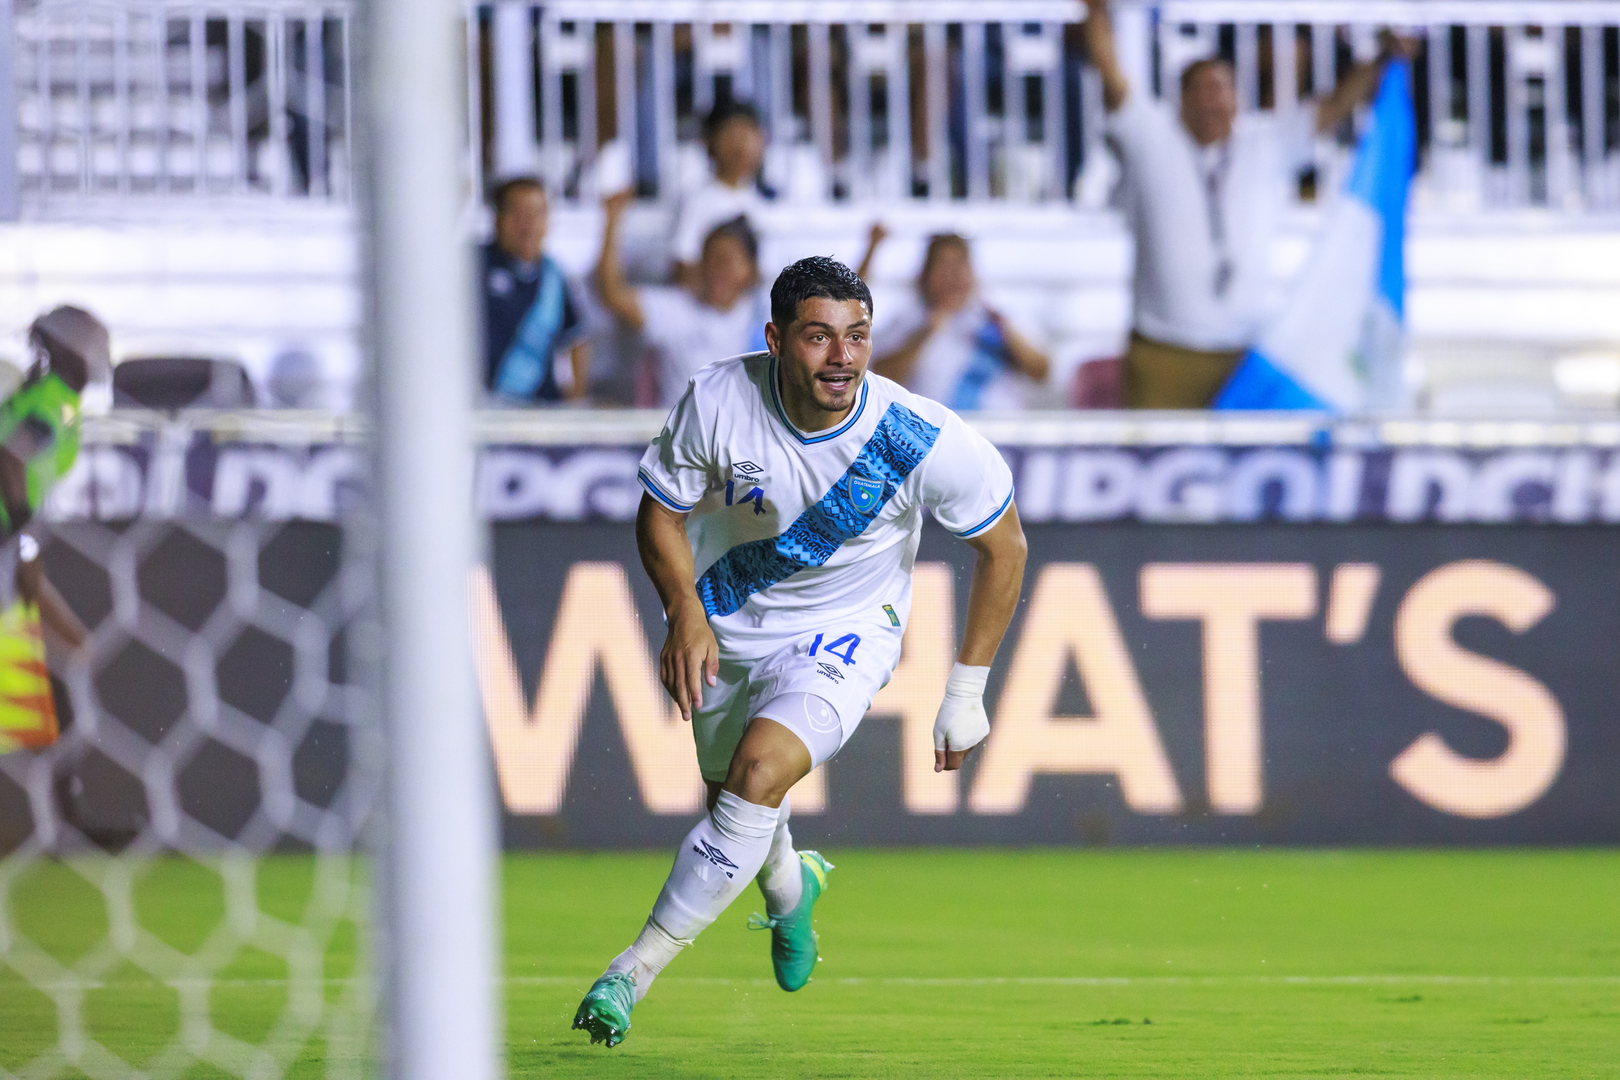 Redemption for Lom as Guatemala down Cuba in opener